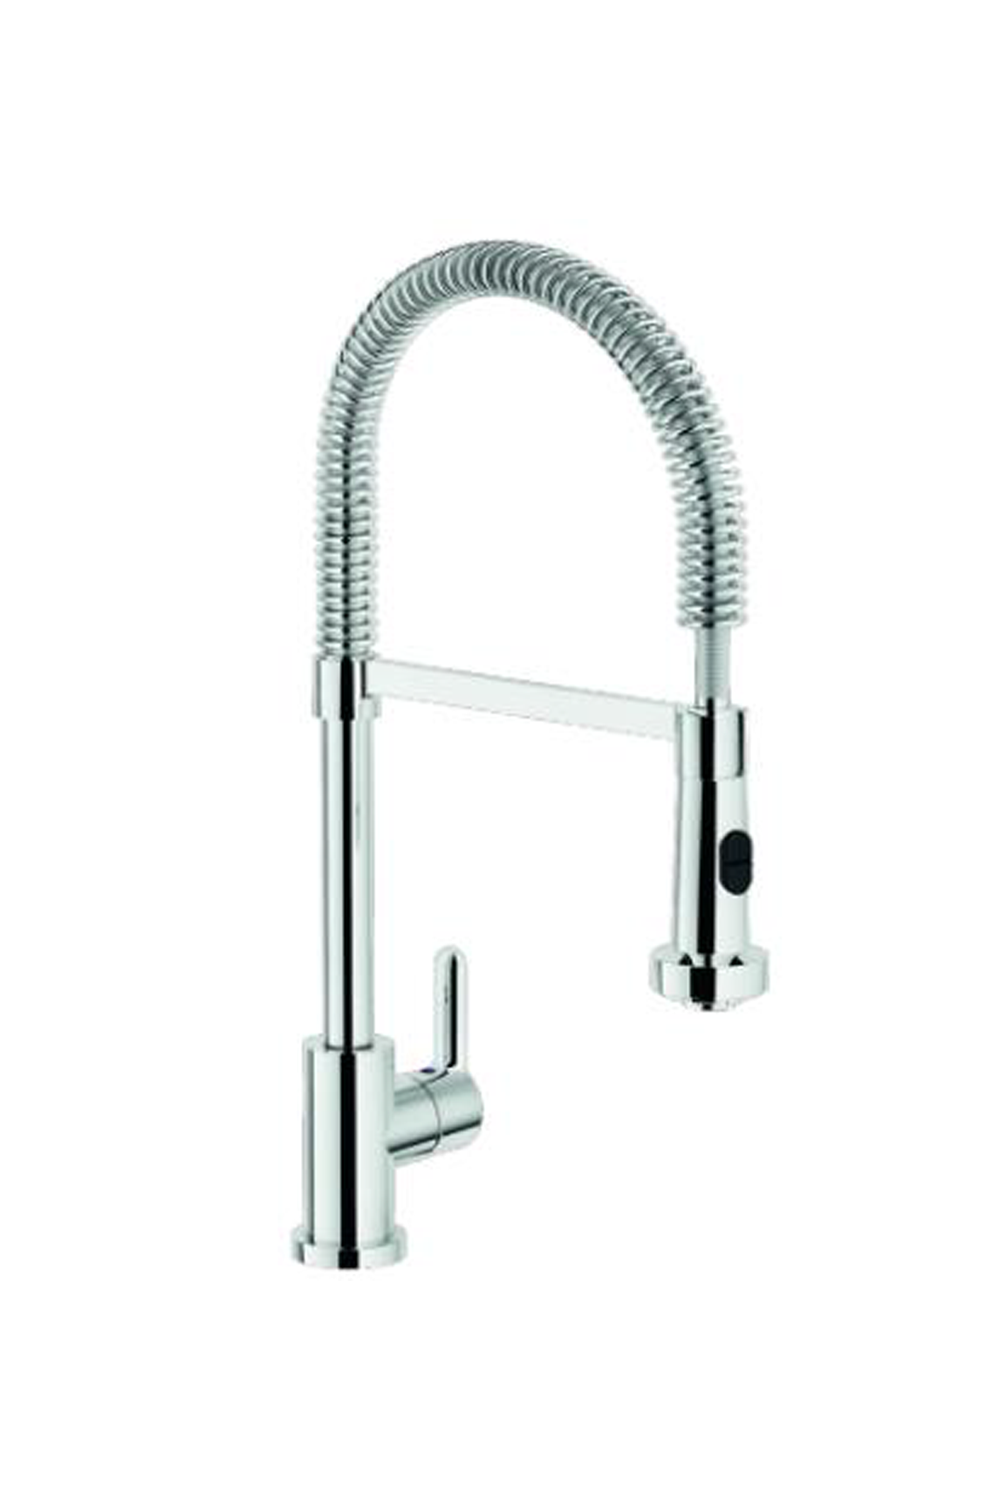 LUISINA RD300/3015 tall style sink mixer with shower | Made in Italy |